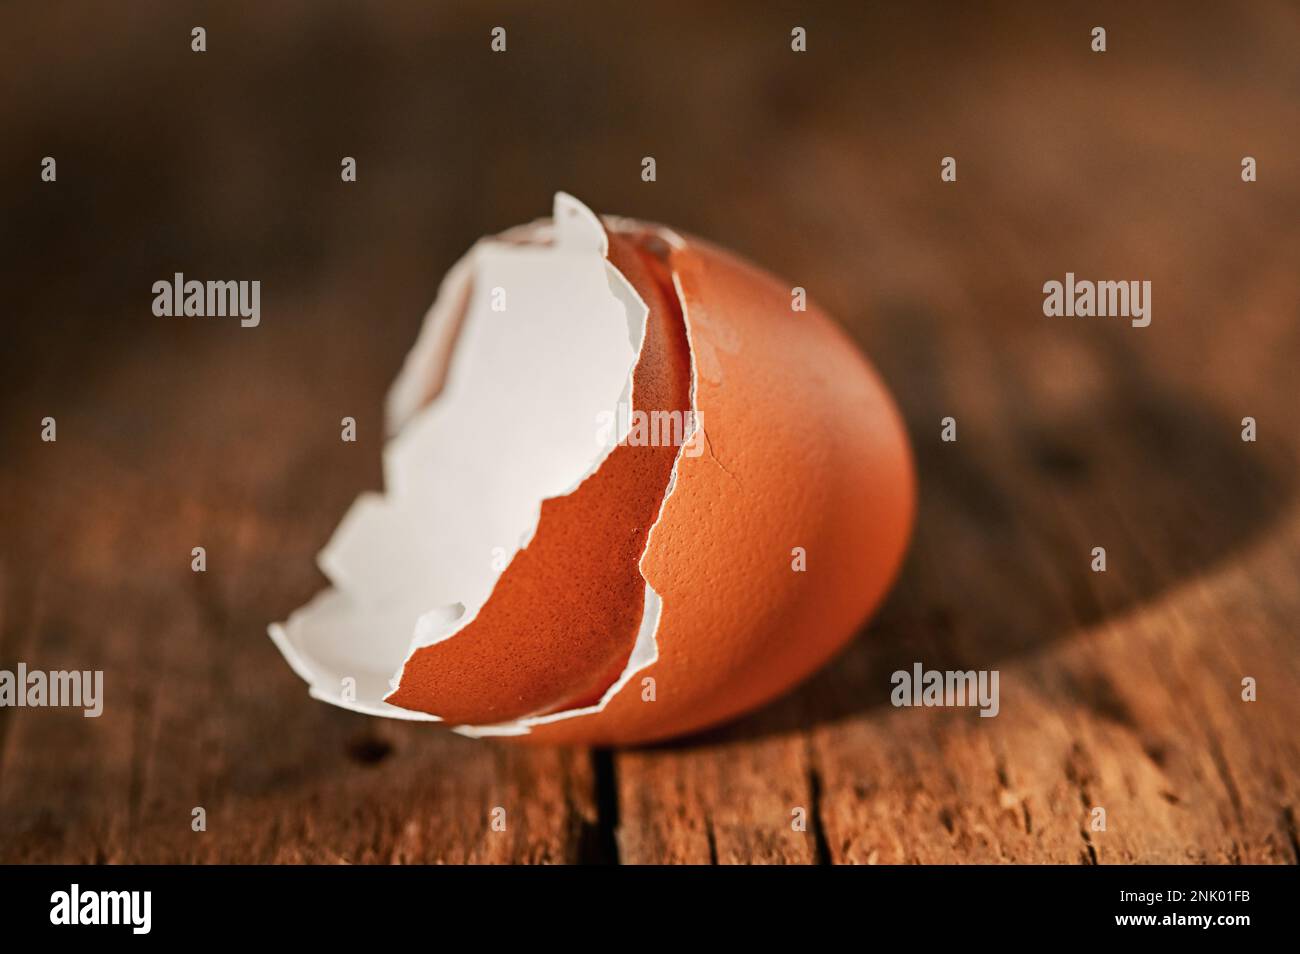 Abstract Egg Shell Cracked In Two Parts on Wooden Table Stock Photo